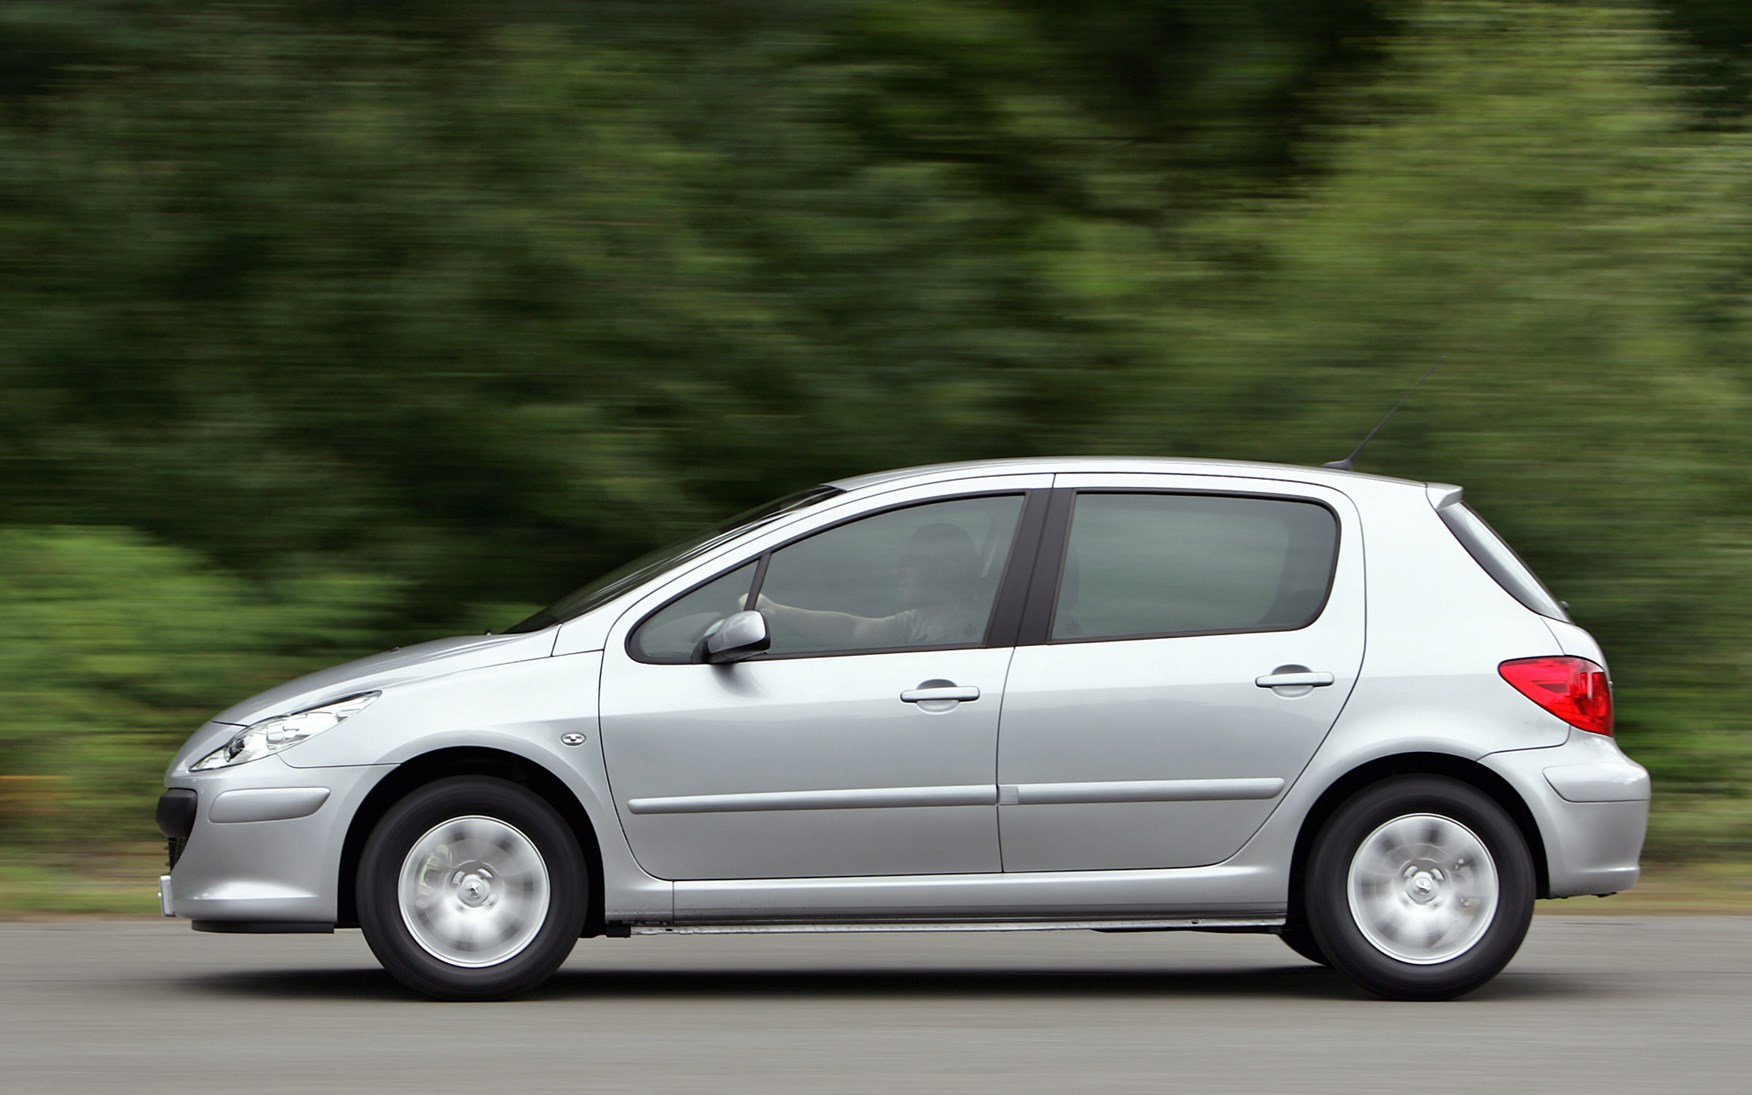 Amazing Peugeot 307 Pictures & Backgrounds